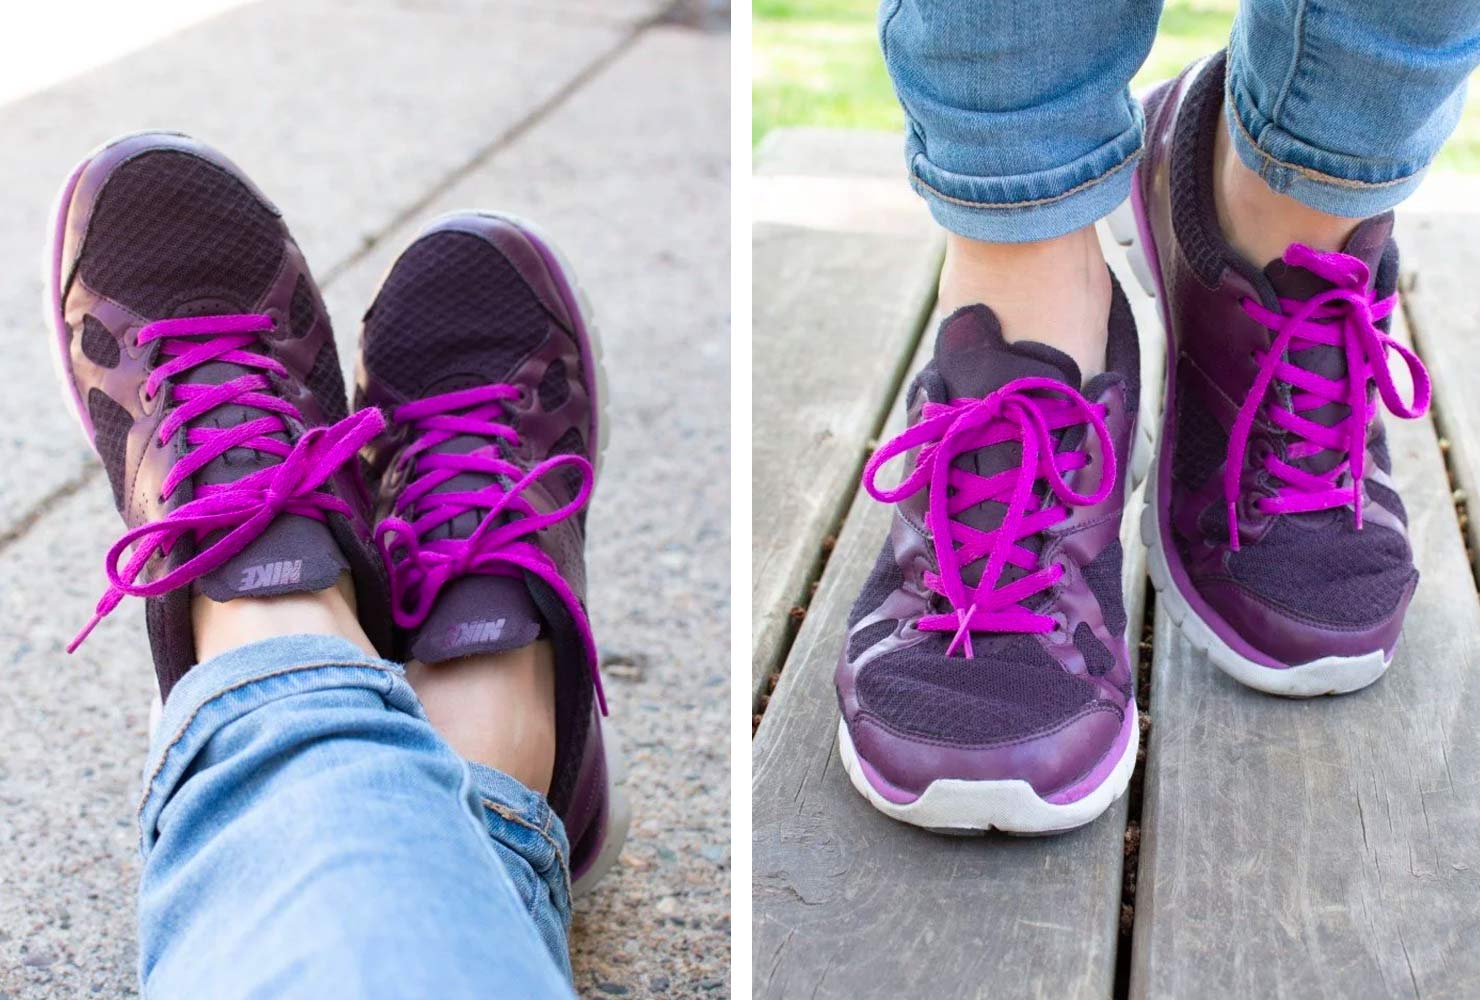 Woman wearing purple sneakers with purple laces.